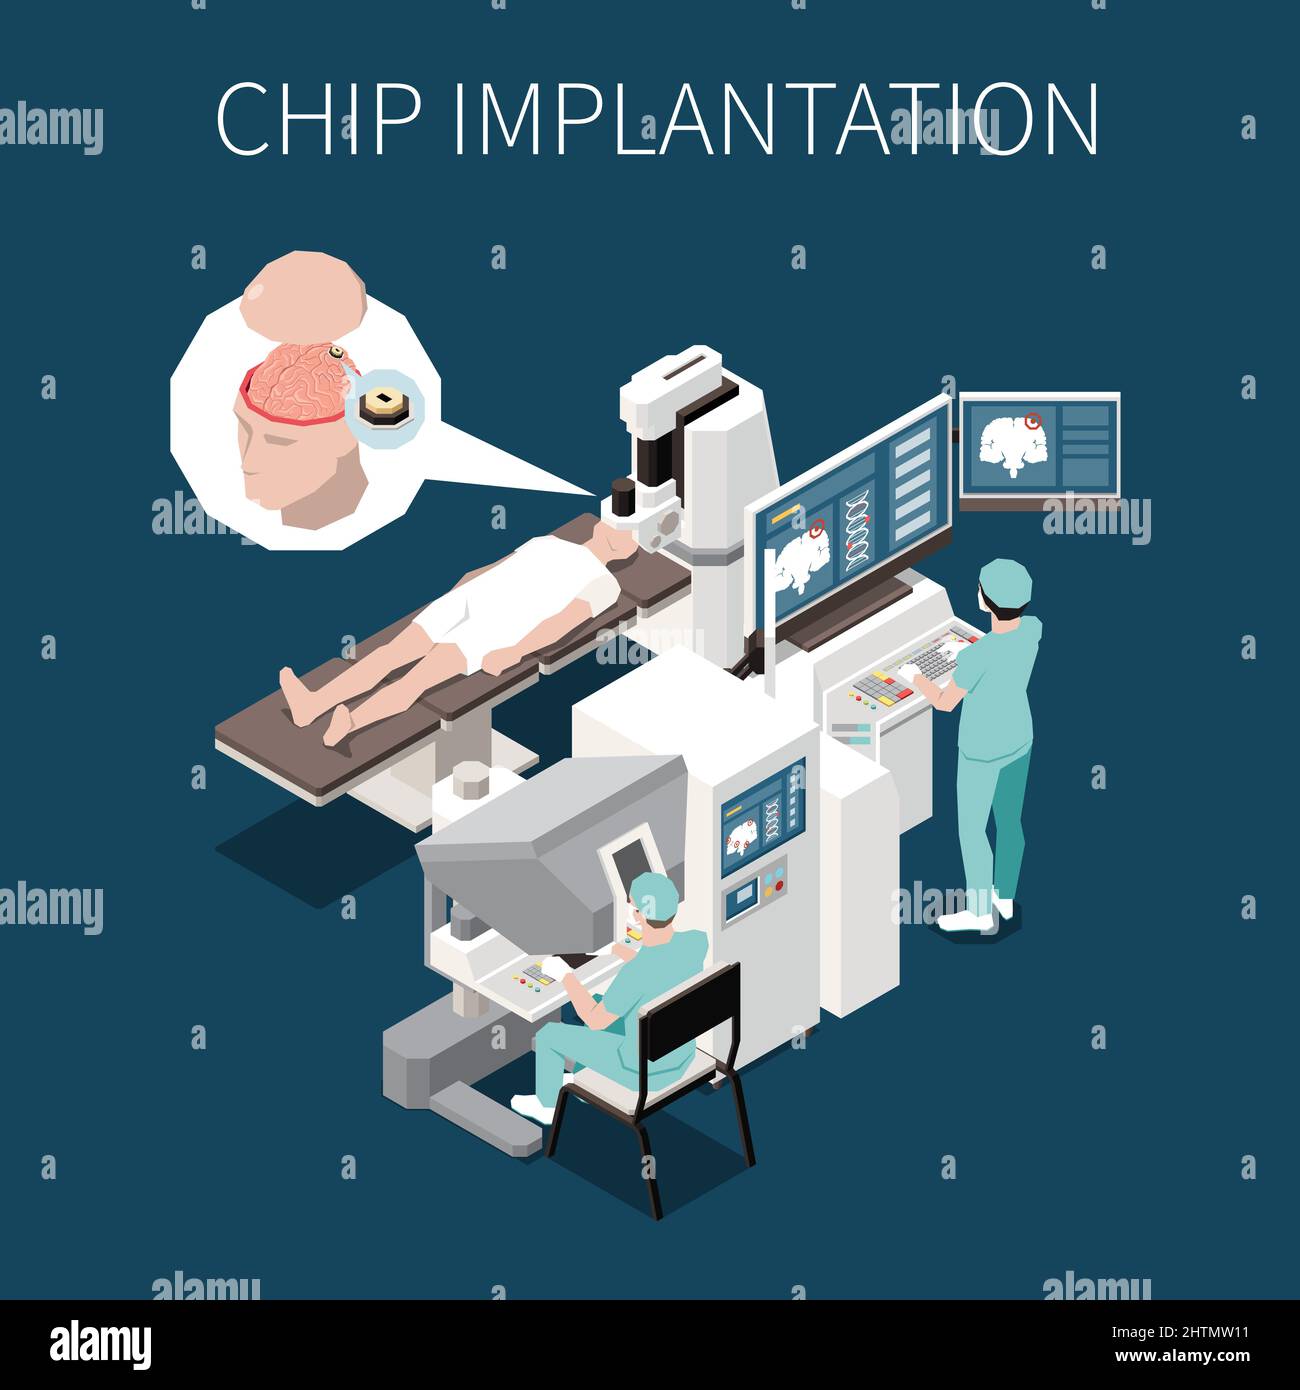 Chip implantation isometric background illustrated high tech surgery operation of implant installation into human brain vector illustration Stock Vector